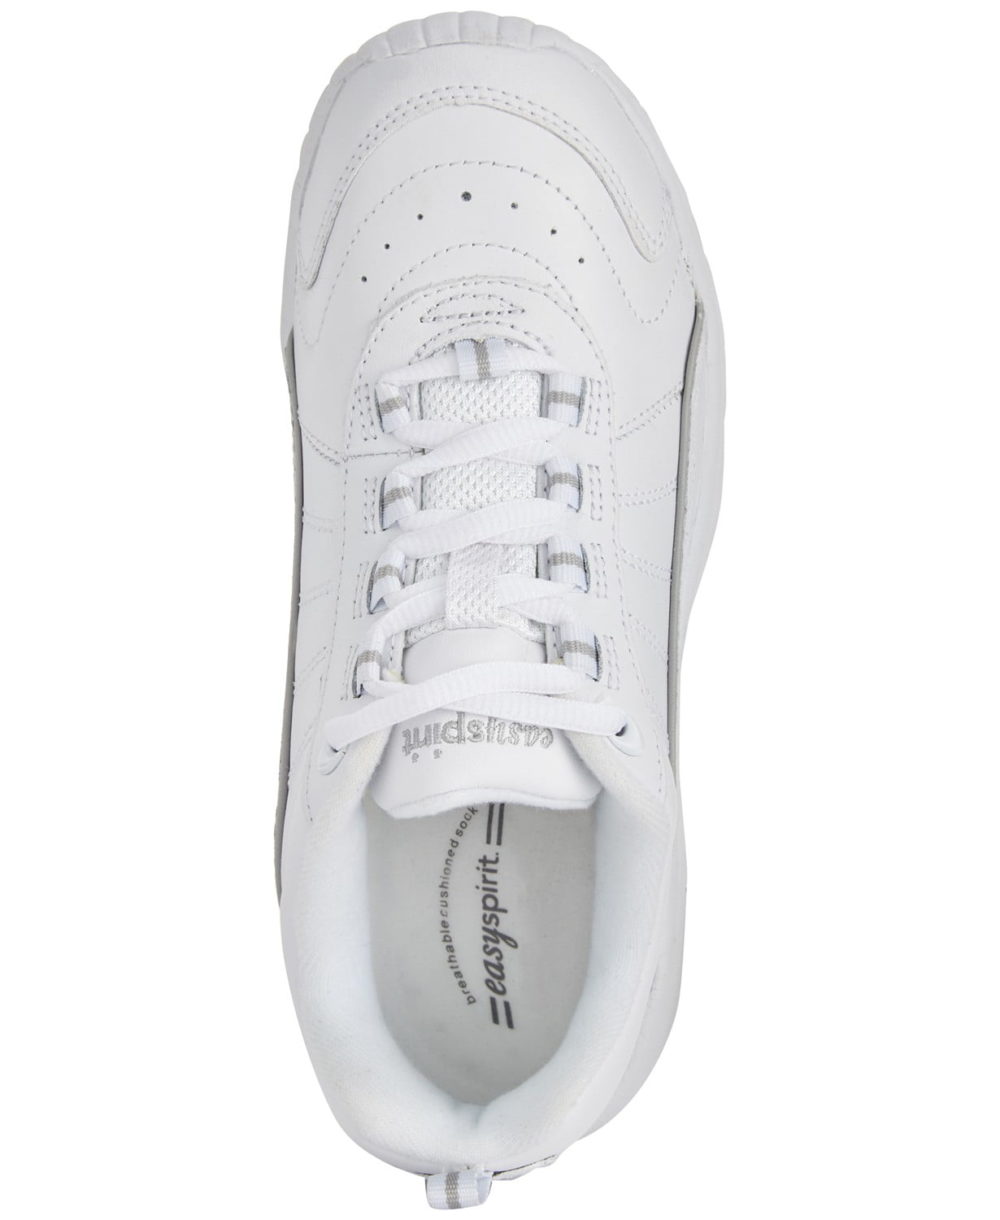 woocommerce-673321-2209615.cloudwaysapps.com-easy-spirit-womens-white-leather-punter-sneakers